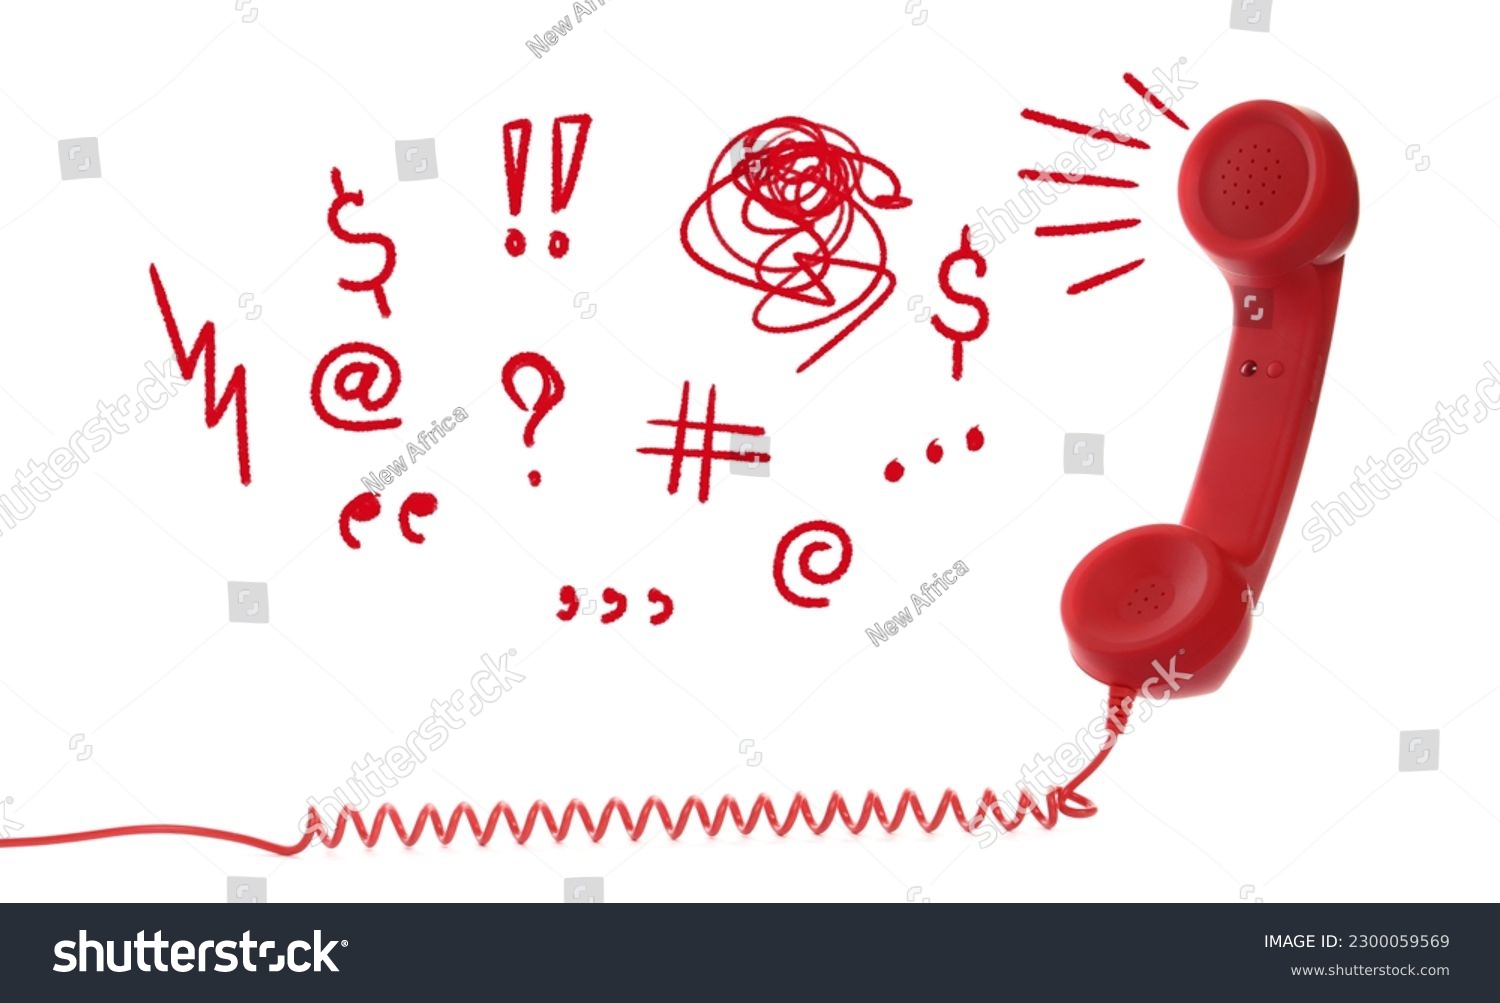 Complaint. Red corded telephone handset and different illustrations on white background #2300059569